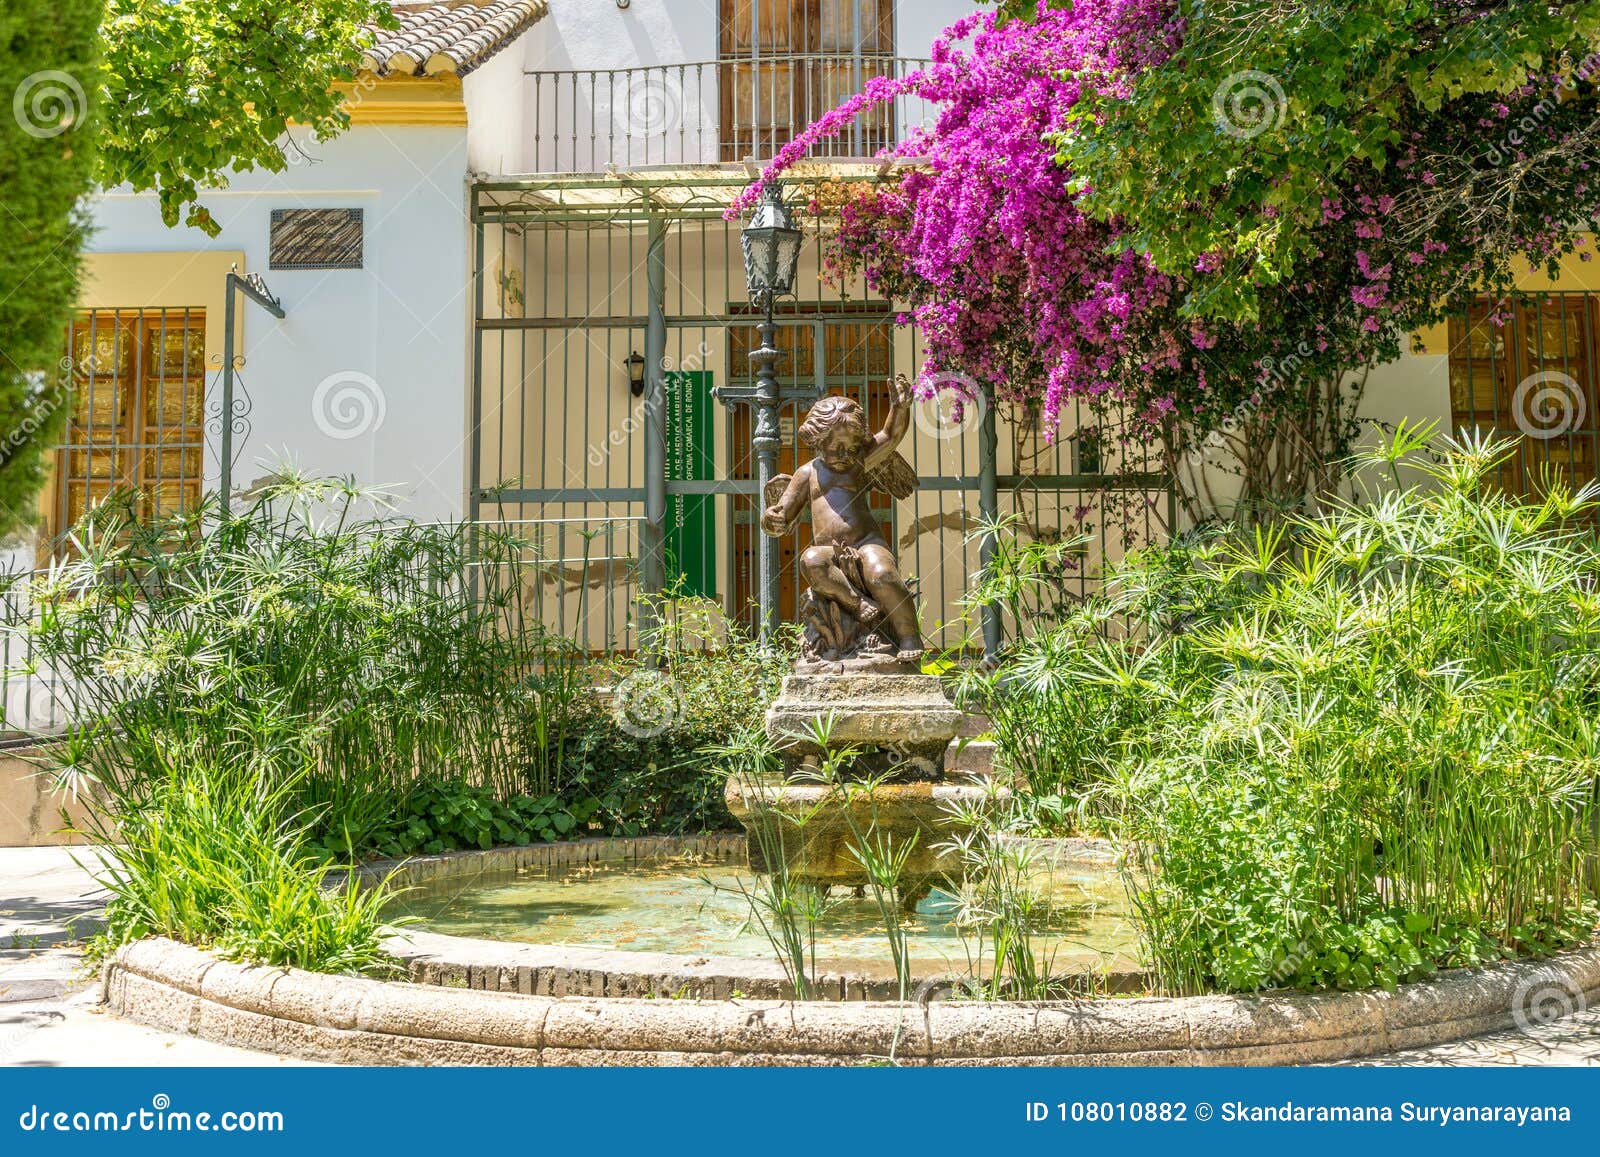 A Water Fountain in the City of Ronda Spain, Europe on a Hot Sum ...